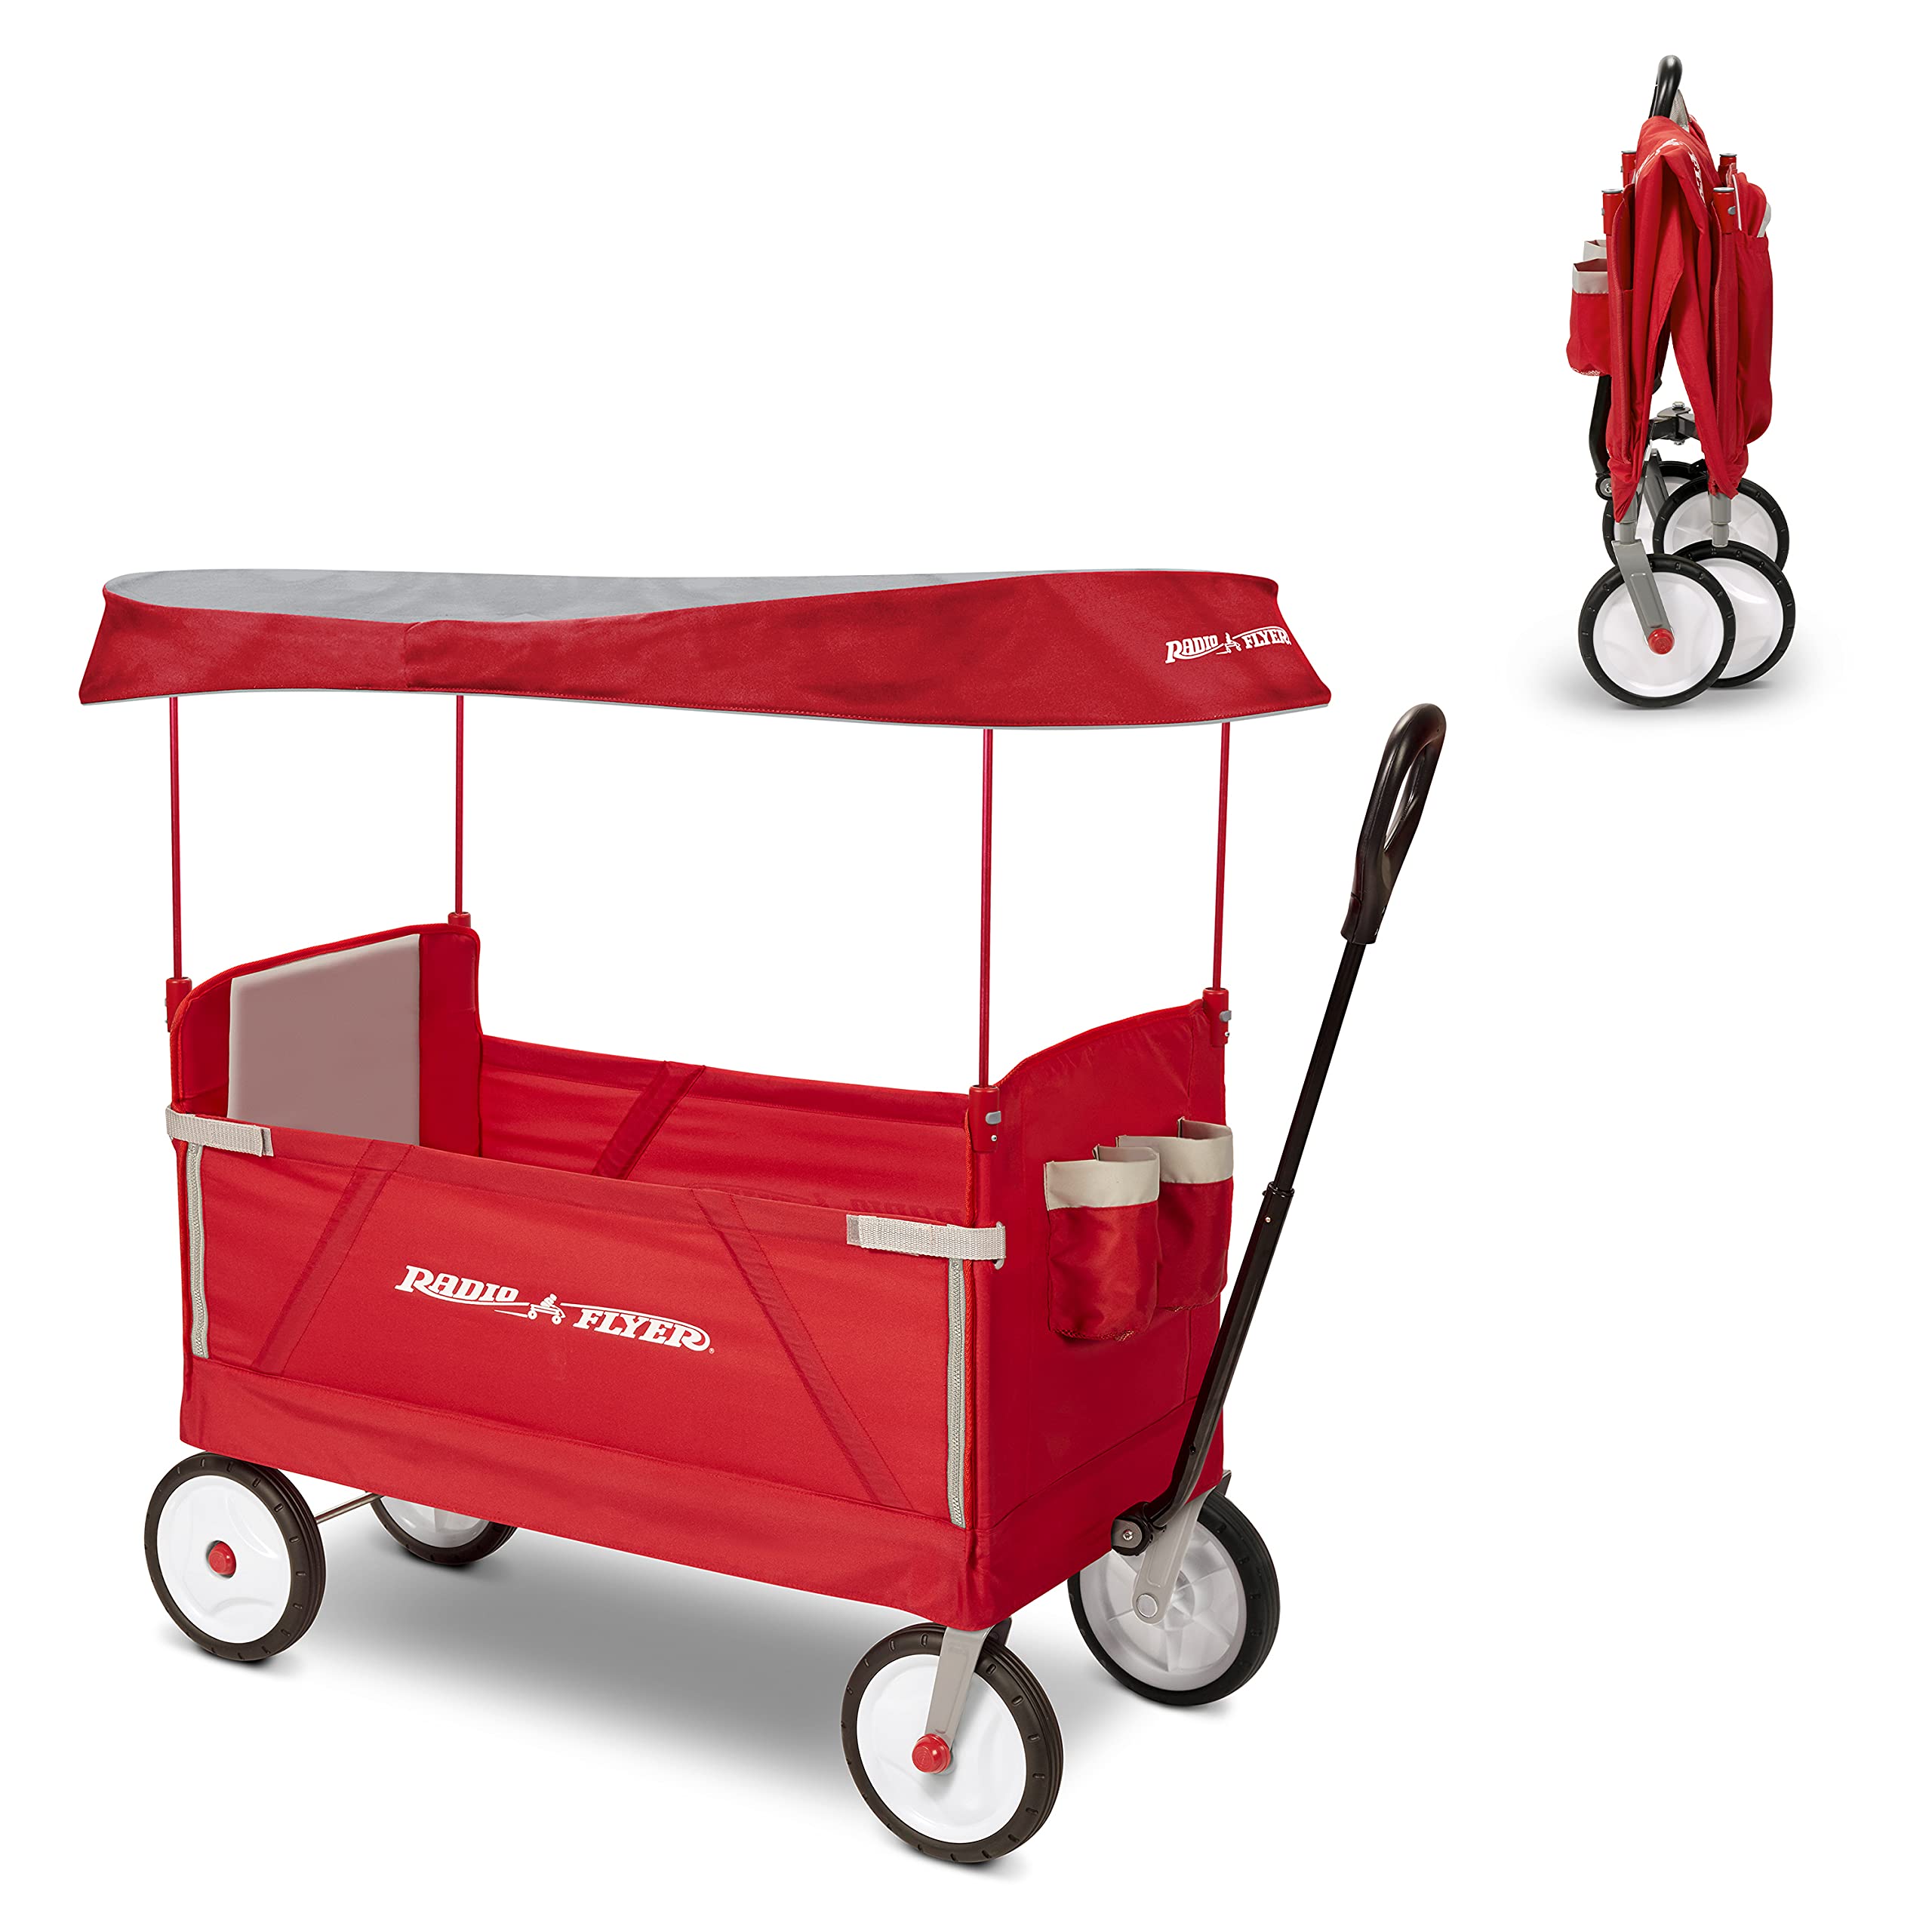 Radio Flyer 3-in-1 EZ Fold Wagon with Canopy $84.99 + Free Shipping